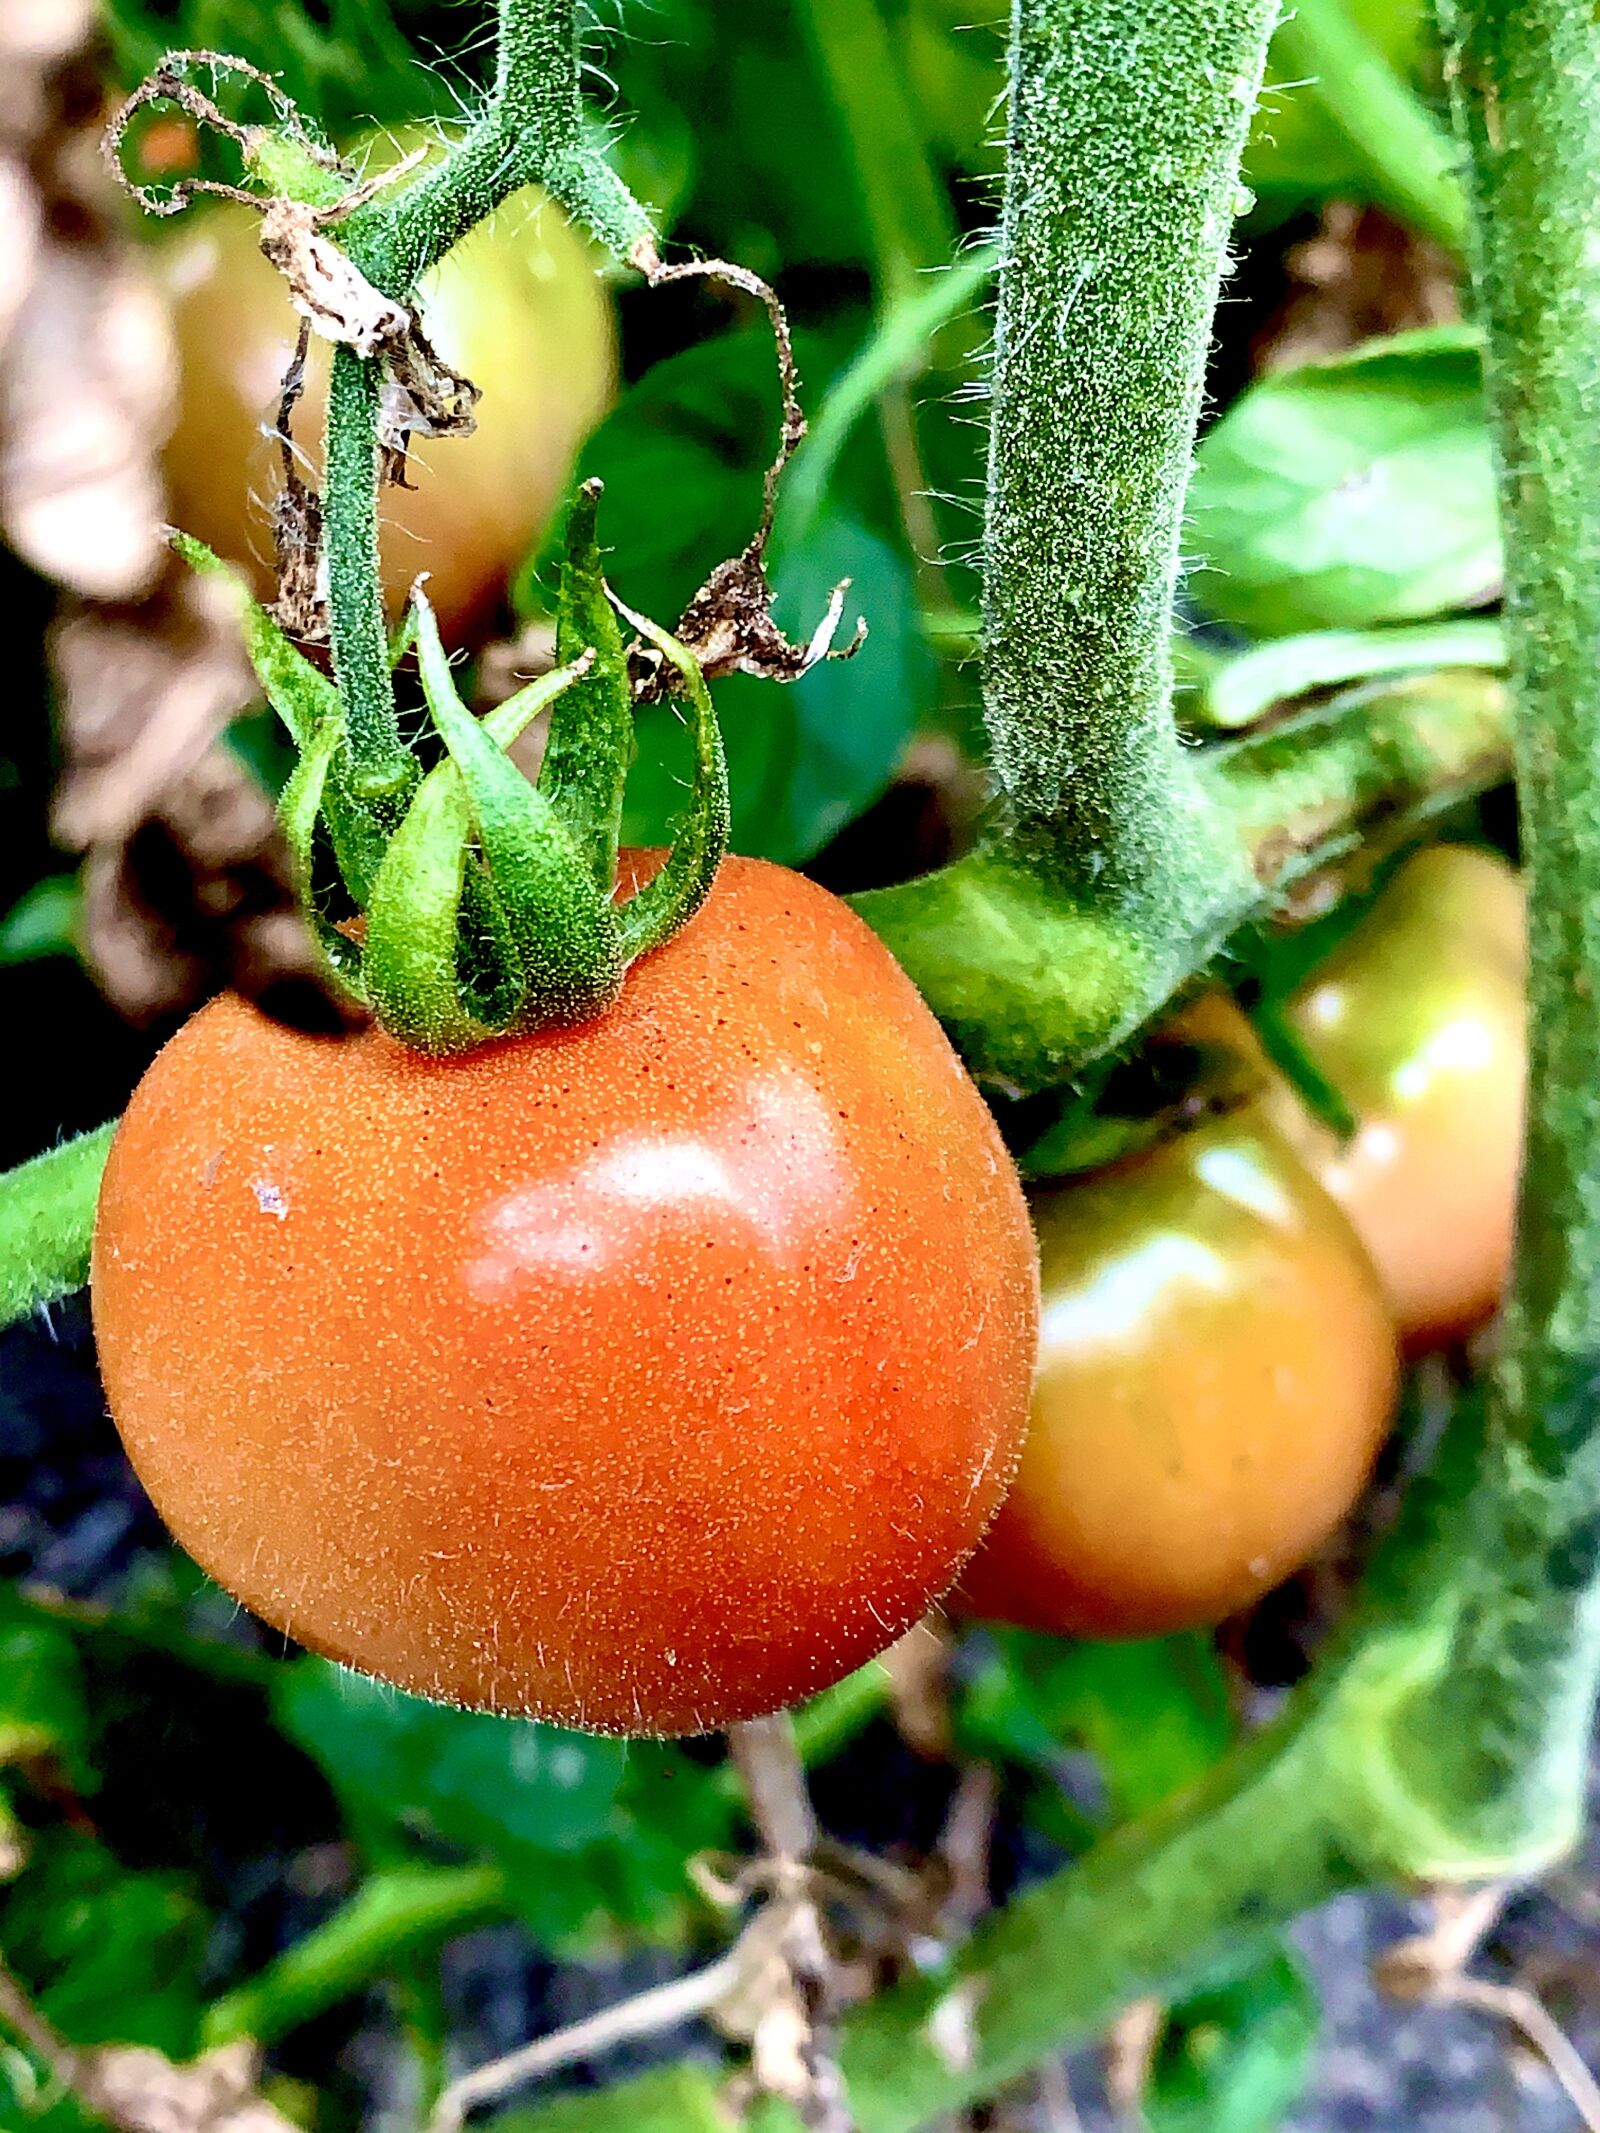 Apple iPhone XS Max + iPhone XS Max back dual camera 4.25mm f/1.8 sample photo. Tomato, garden, vegetables photography